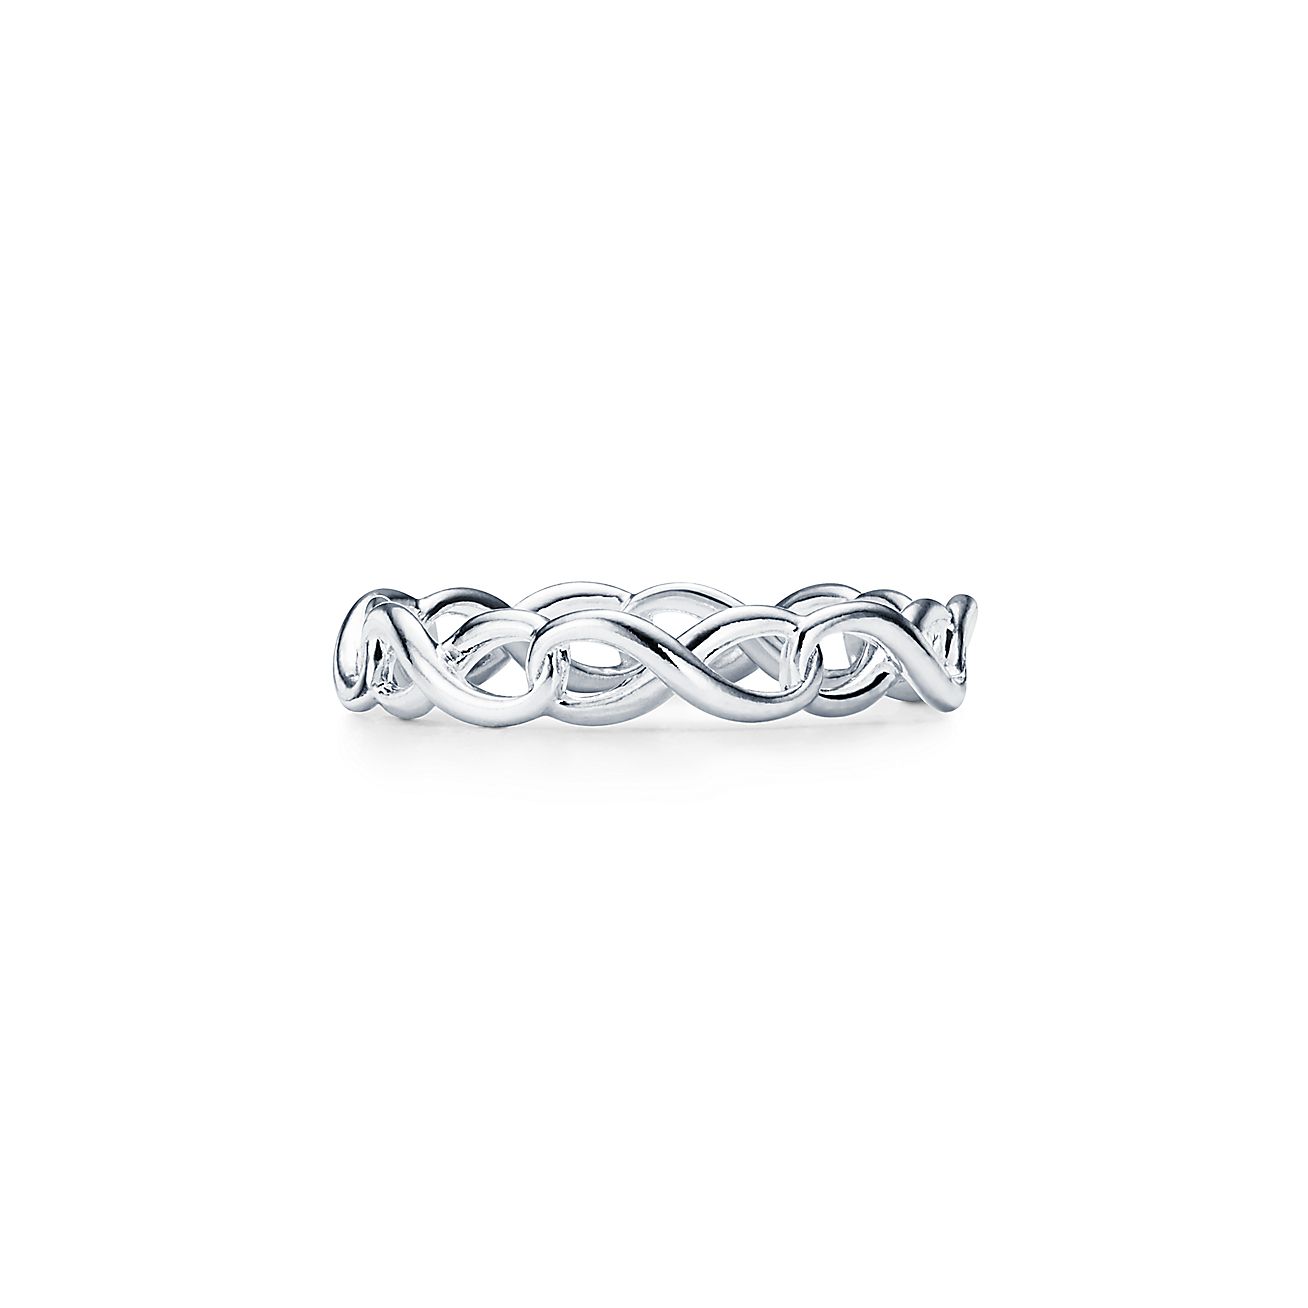 laden Gezicht omhoog Vertrouwen Tiffany Infinity narrow band ring in sterling silver | Tiffany & Co.